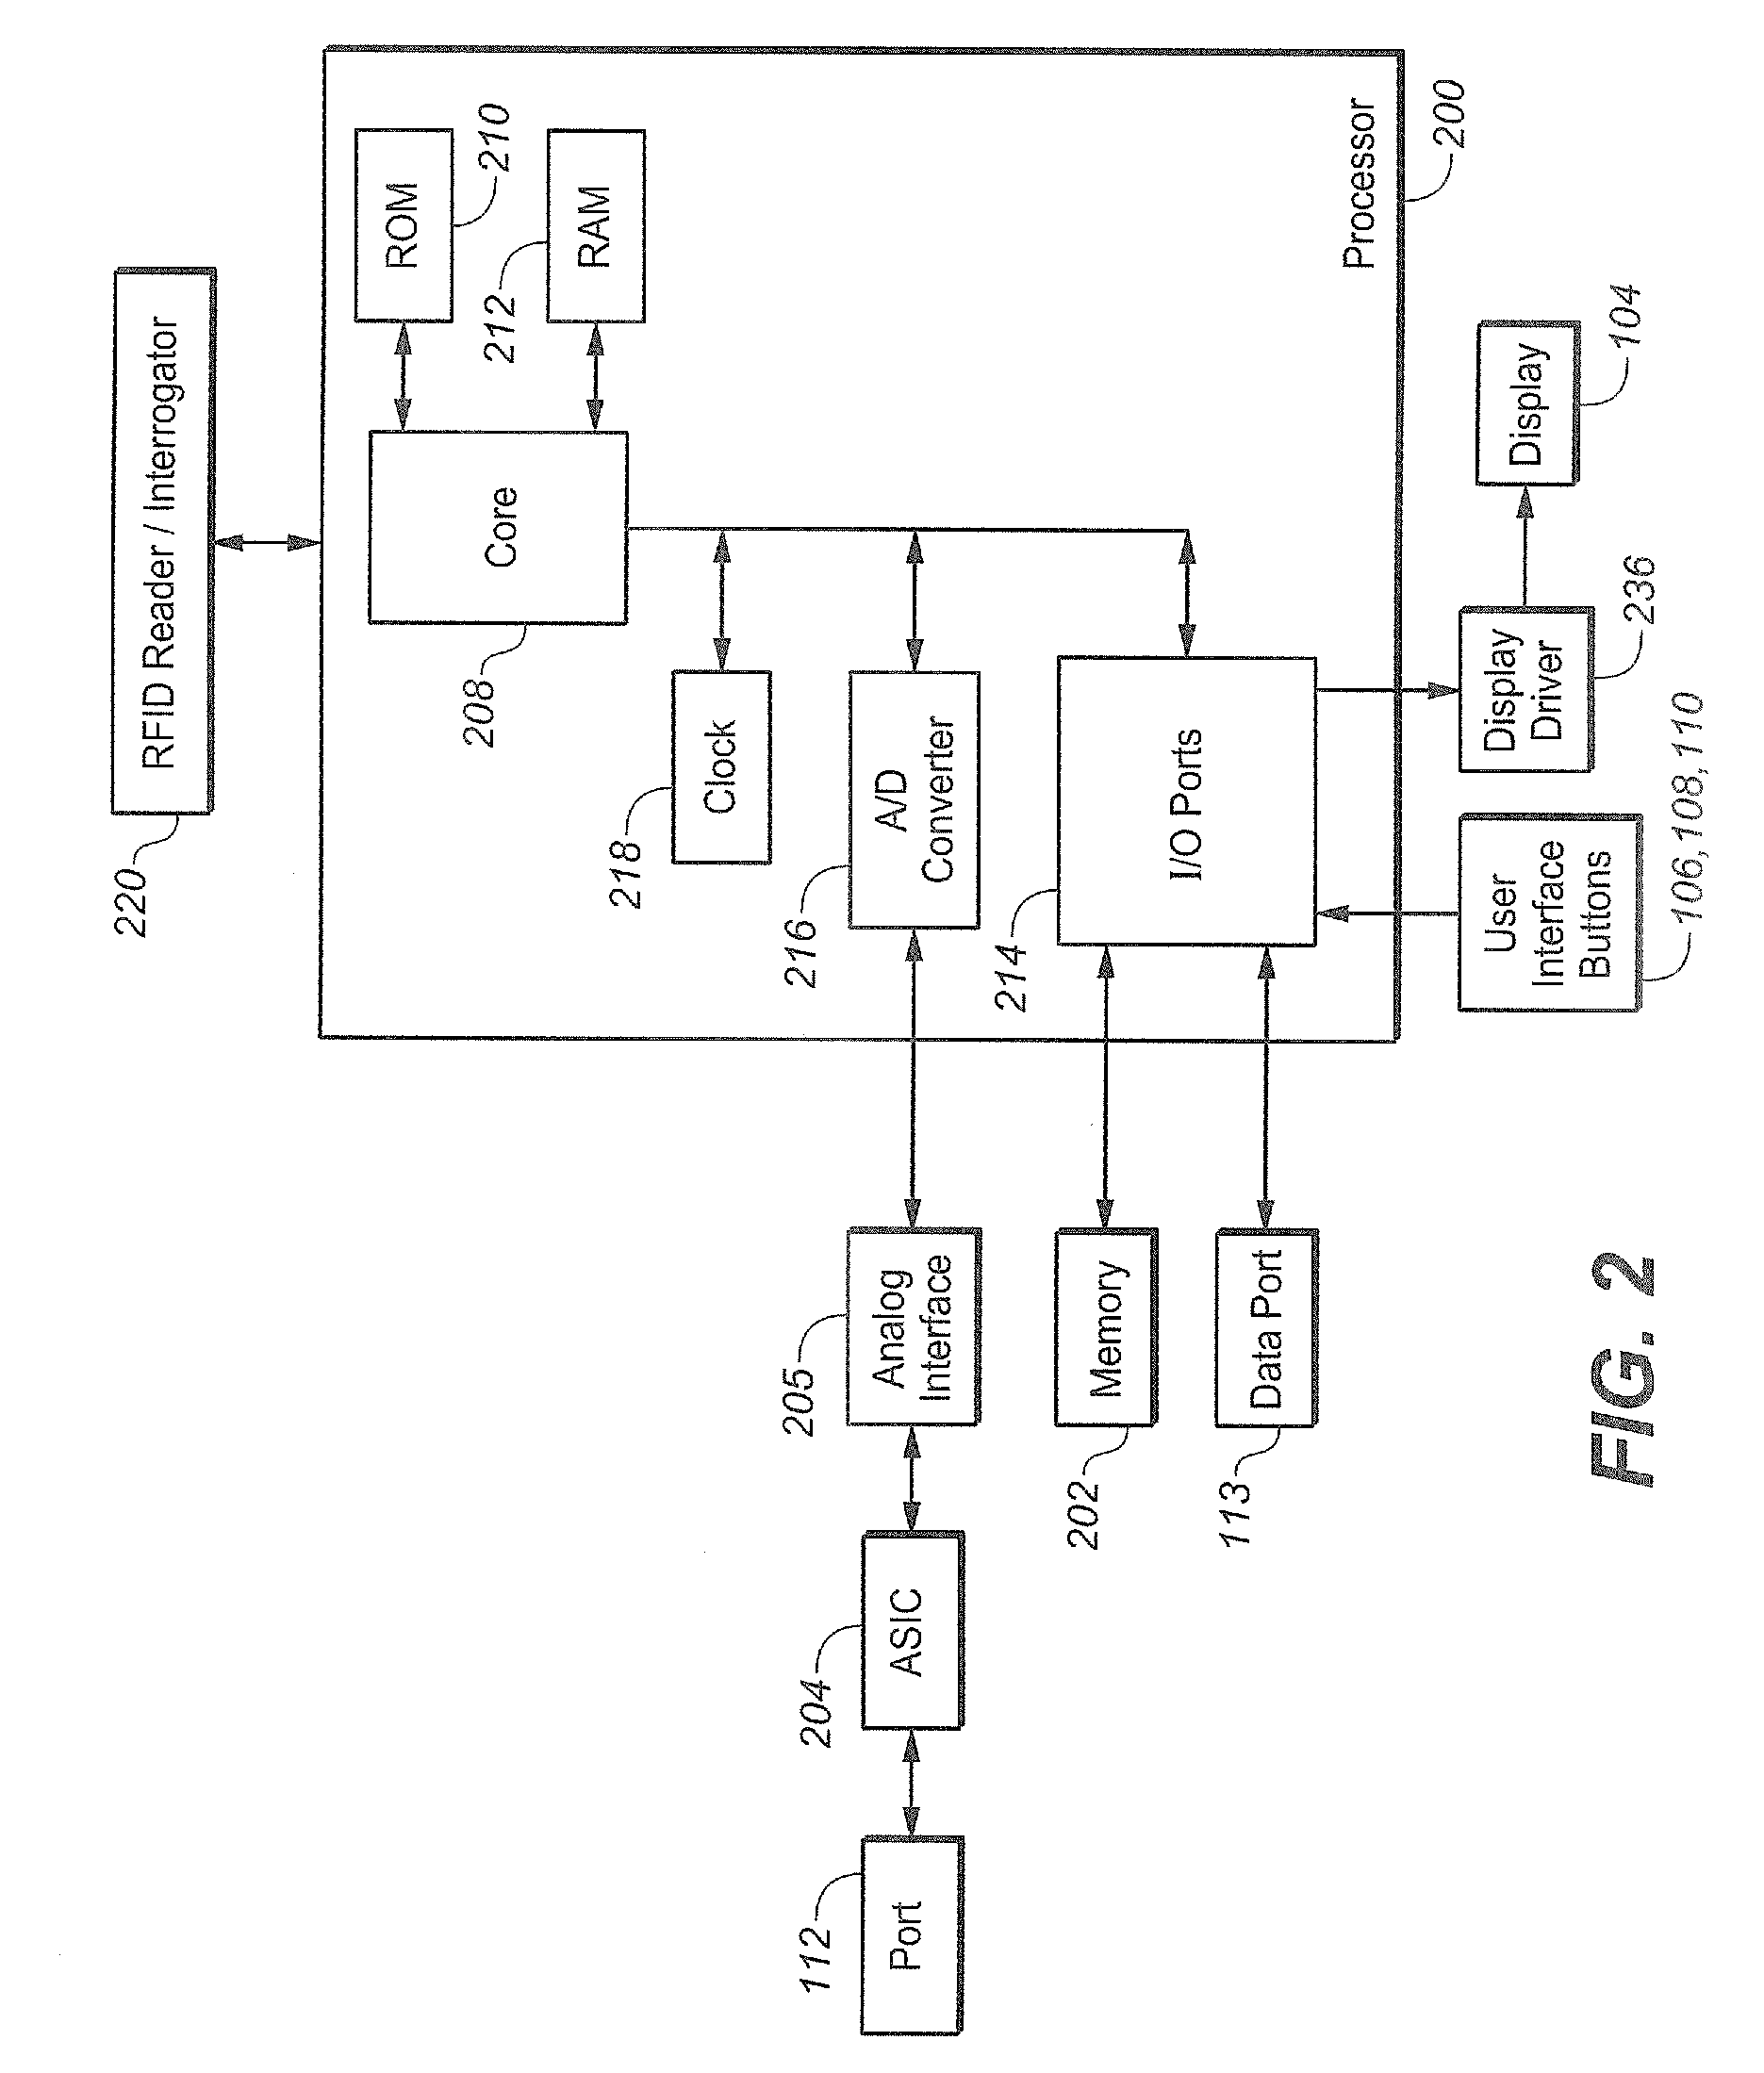 Analyte measurement and management device and associated methods